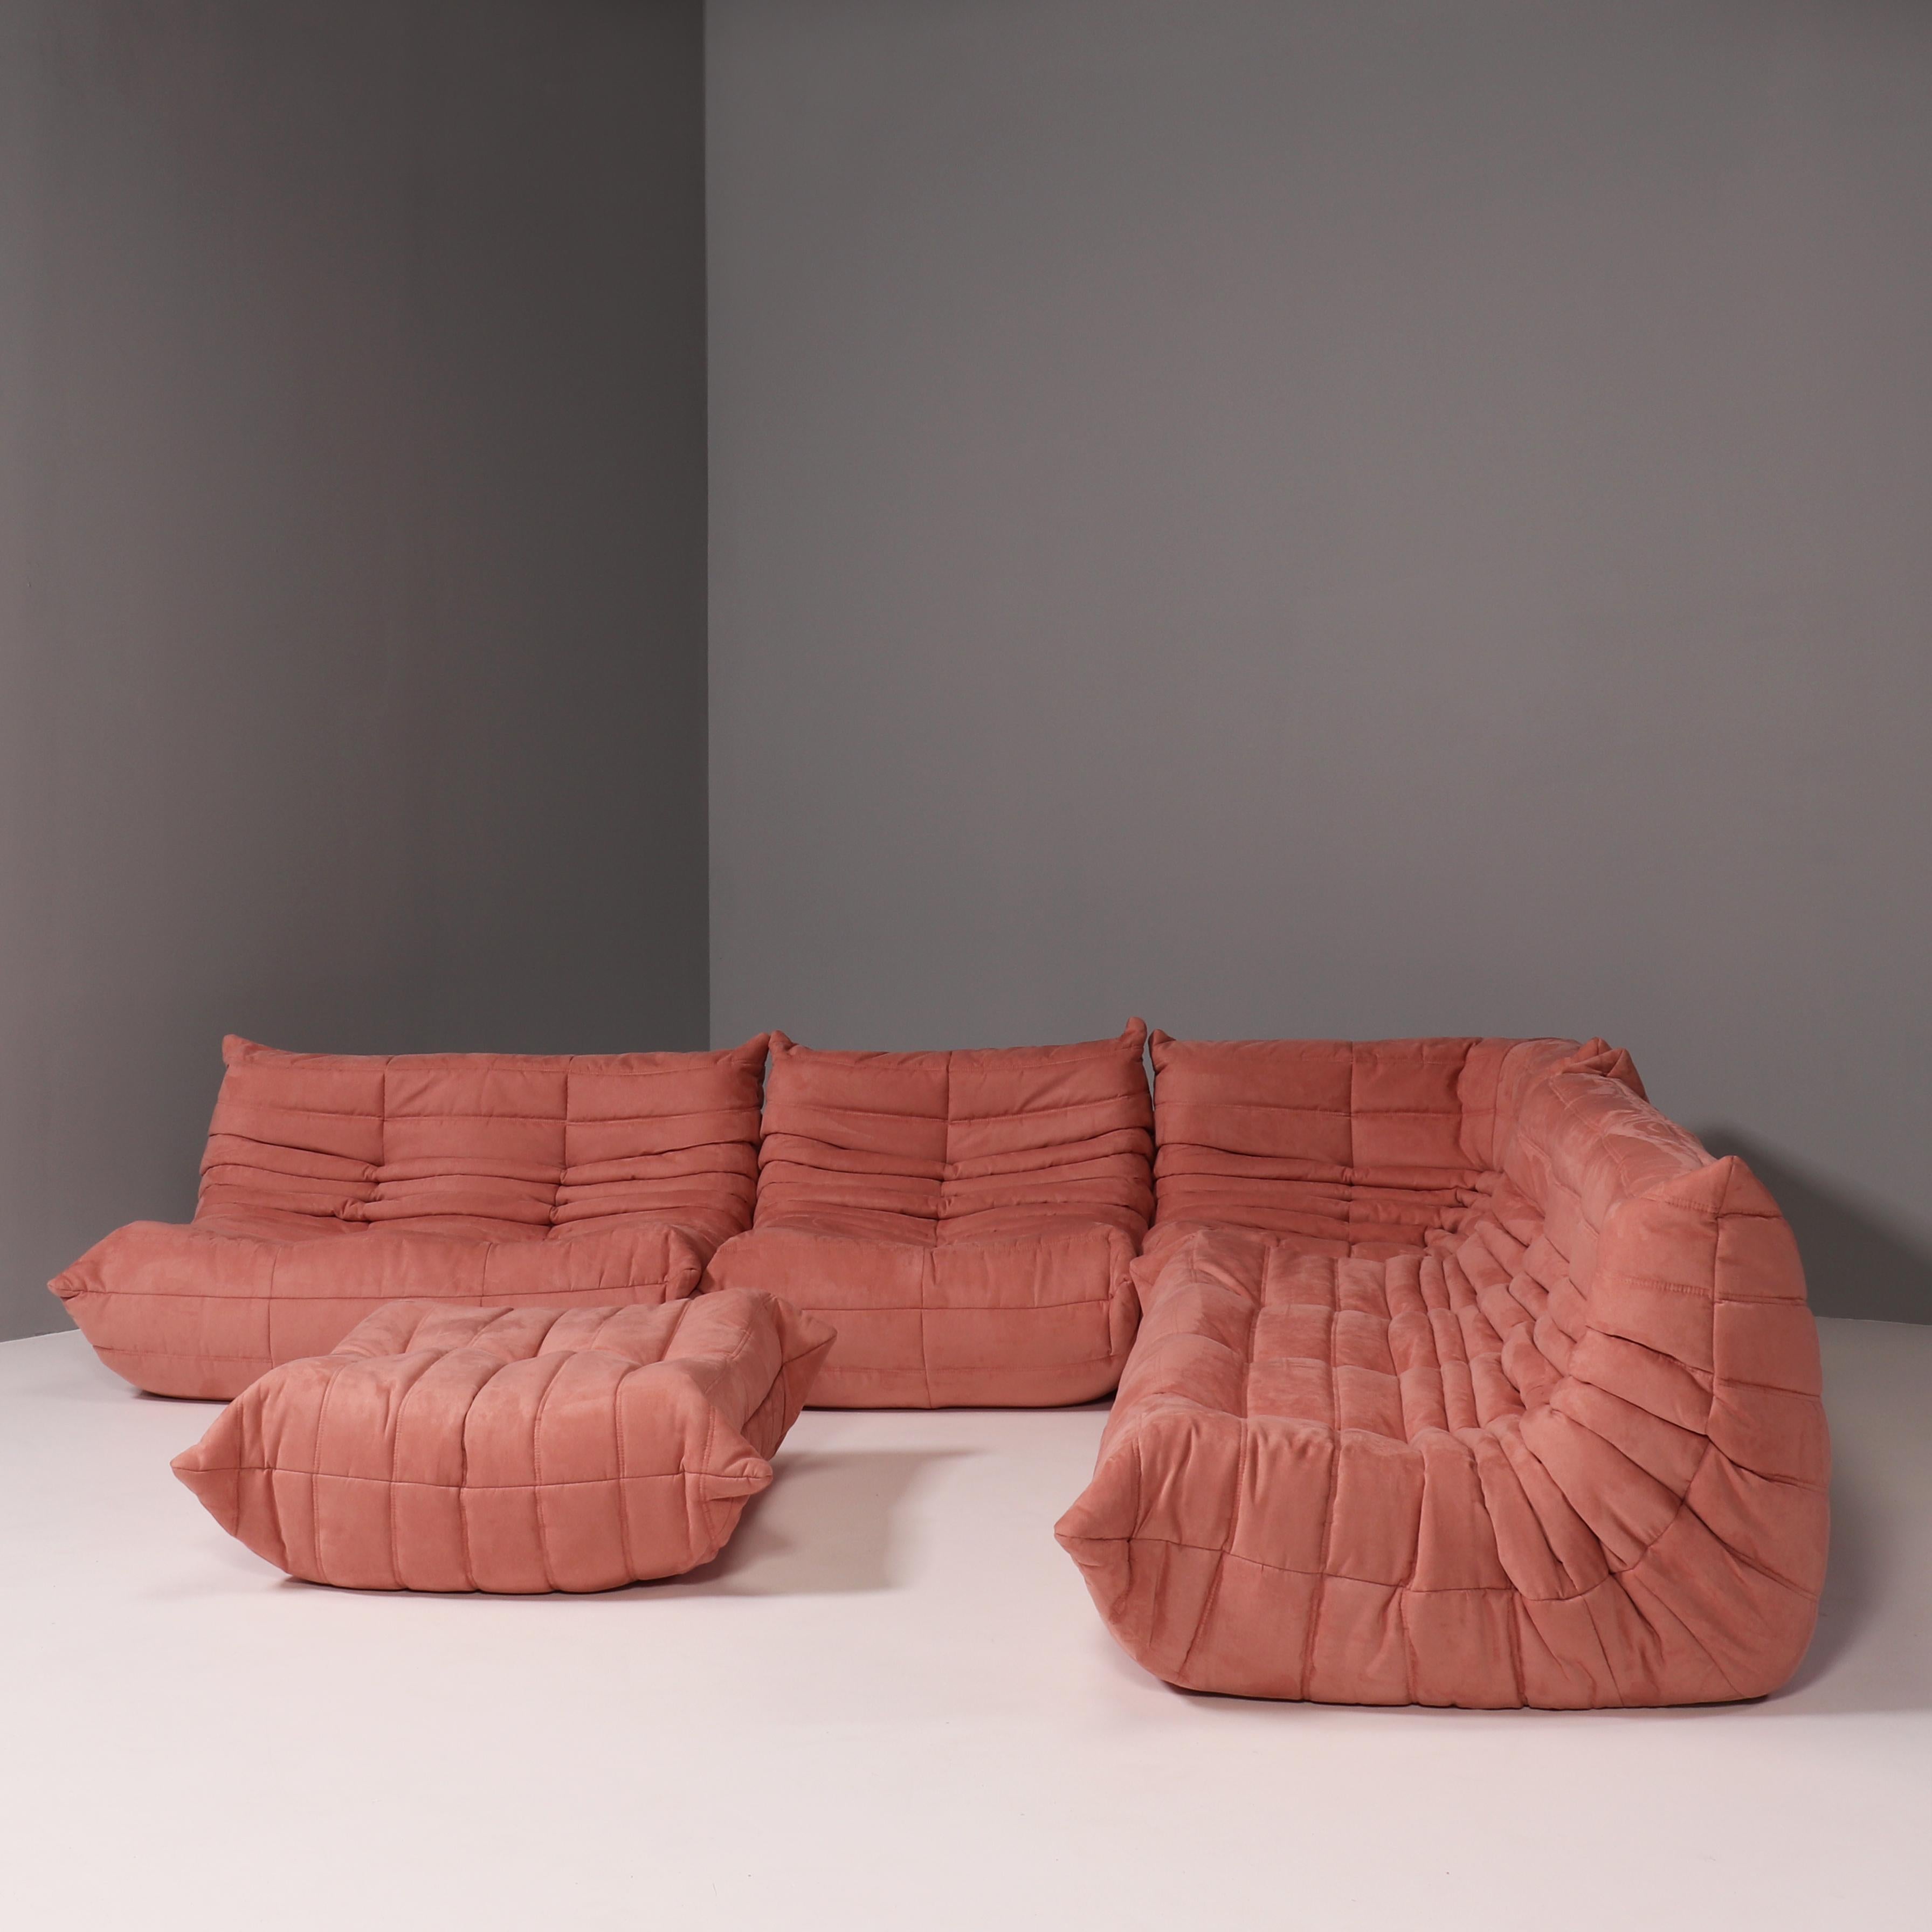 French Ligne Roset by Michel Ducaroy Togo Pink Modular Sofa and Footstool, Set of 4